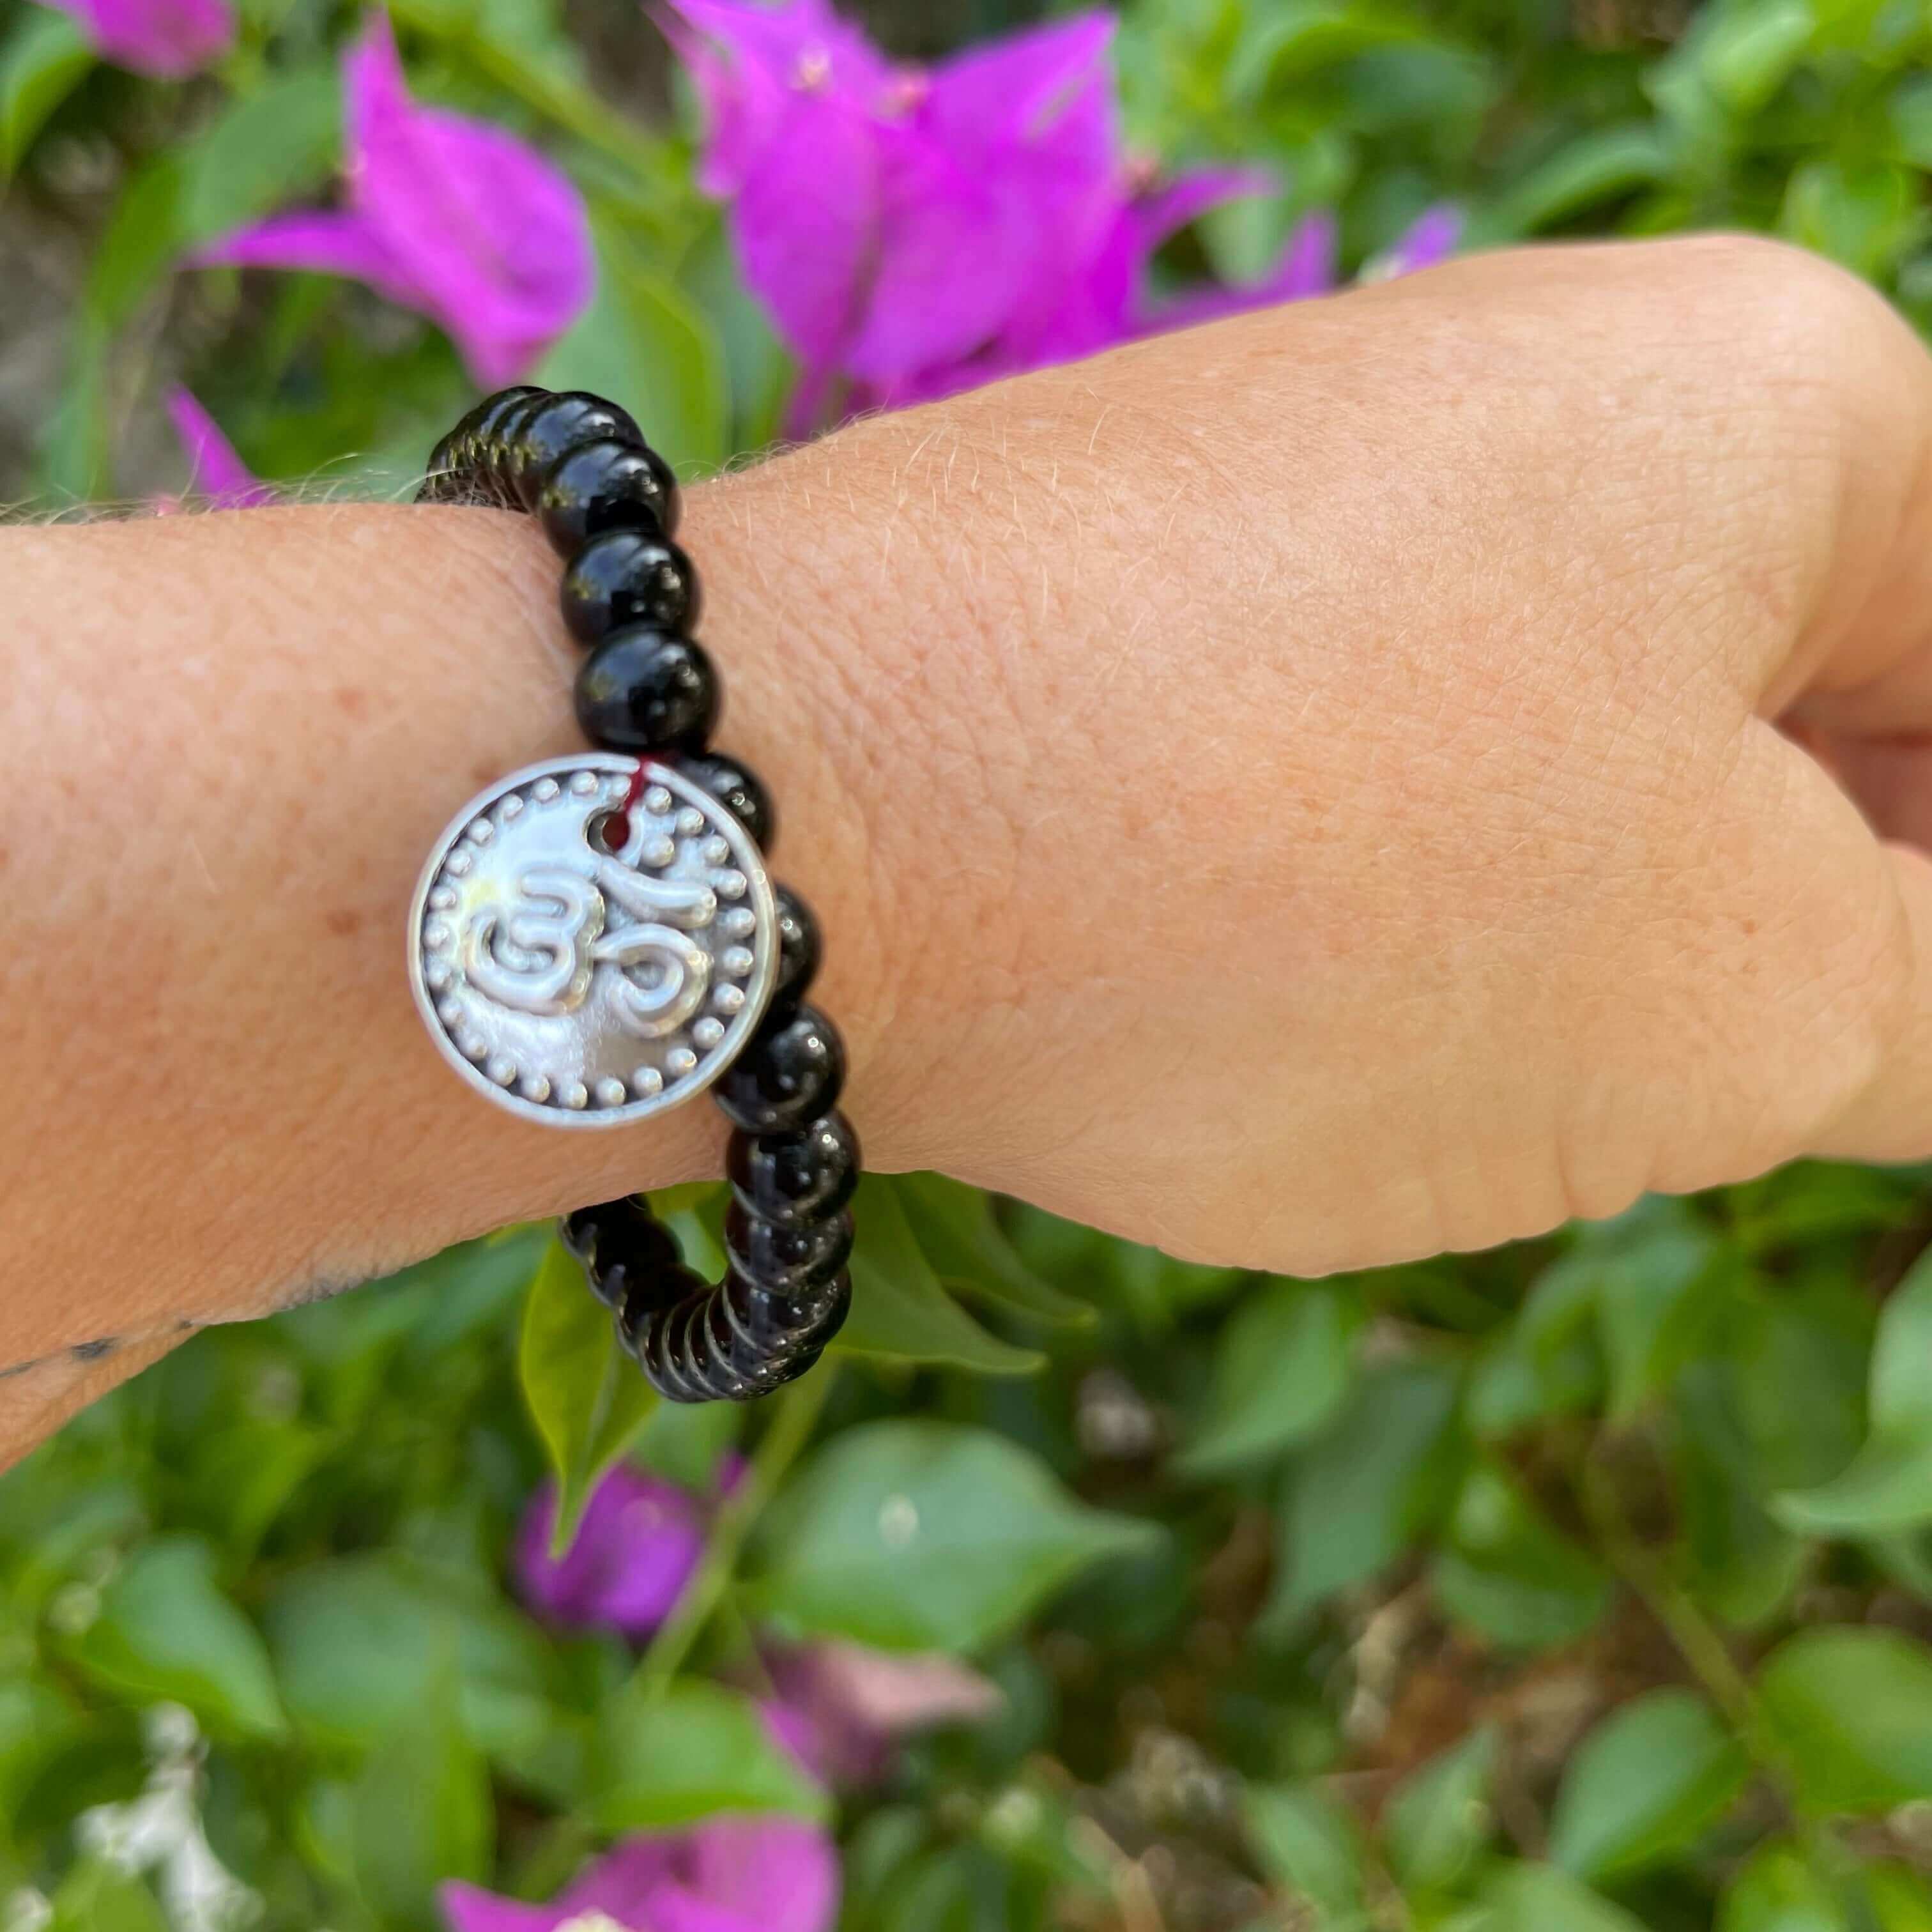 Natural black tourmaline energy bracelet - 6mm stone beads with an OM pendant